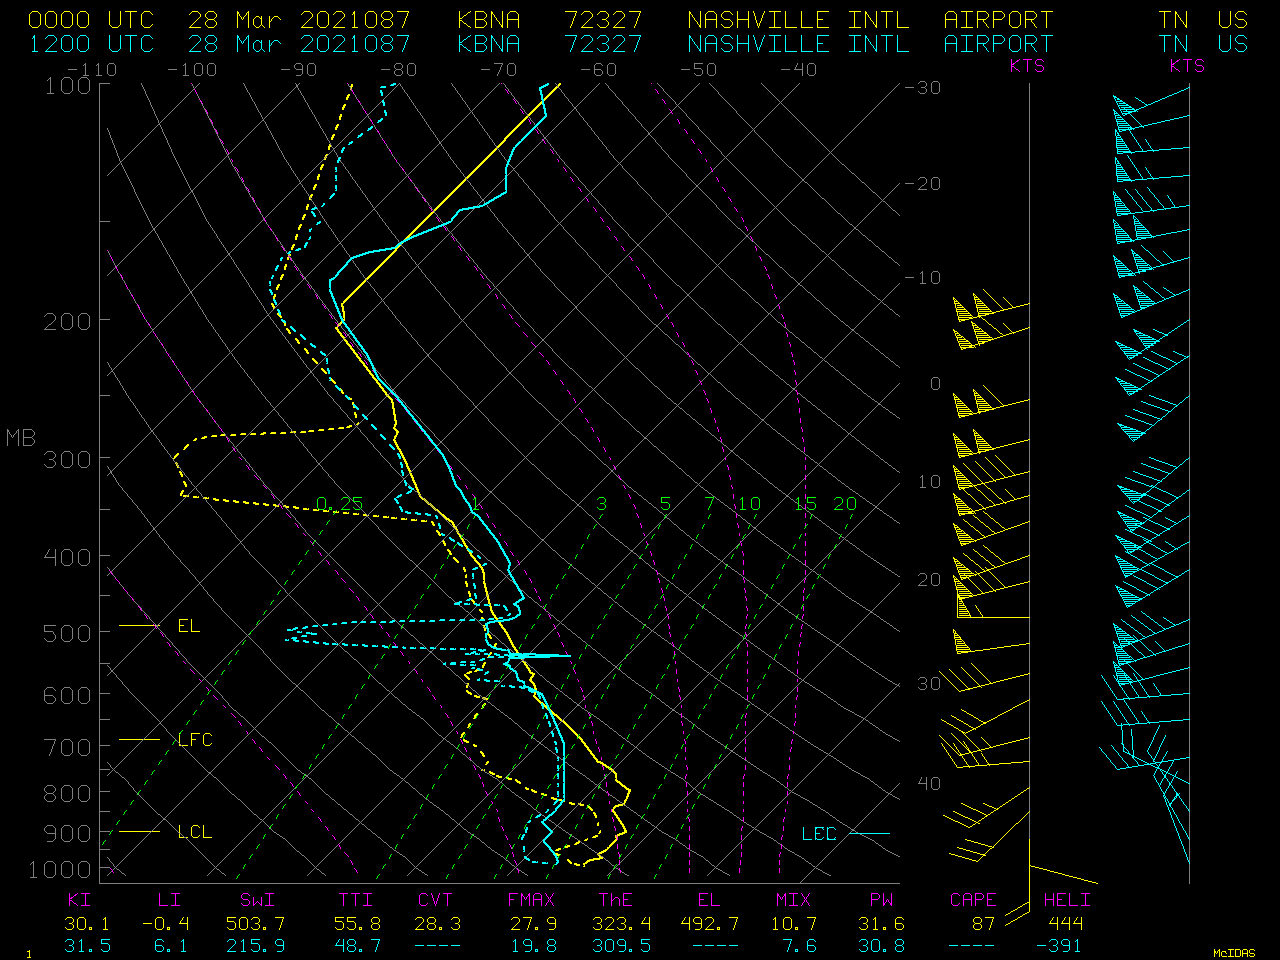 Plots of rawinsonde data from 00 UTC and 12 UTC on 28 March [click to enlarge]